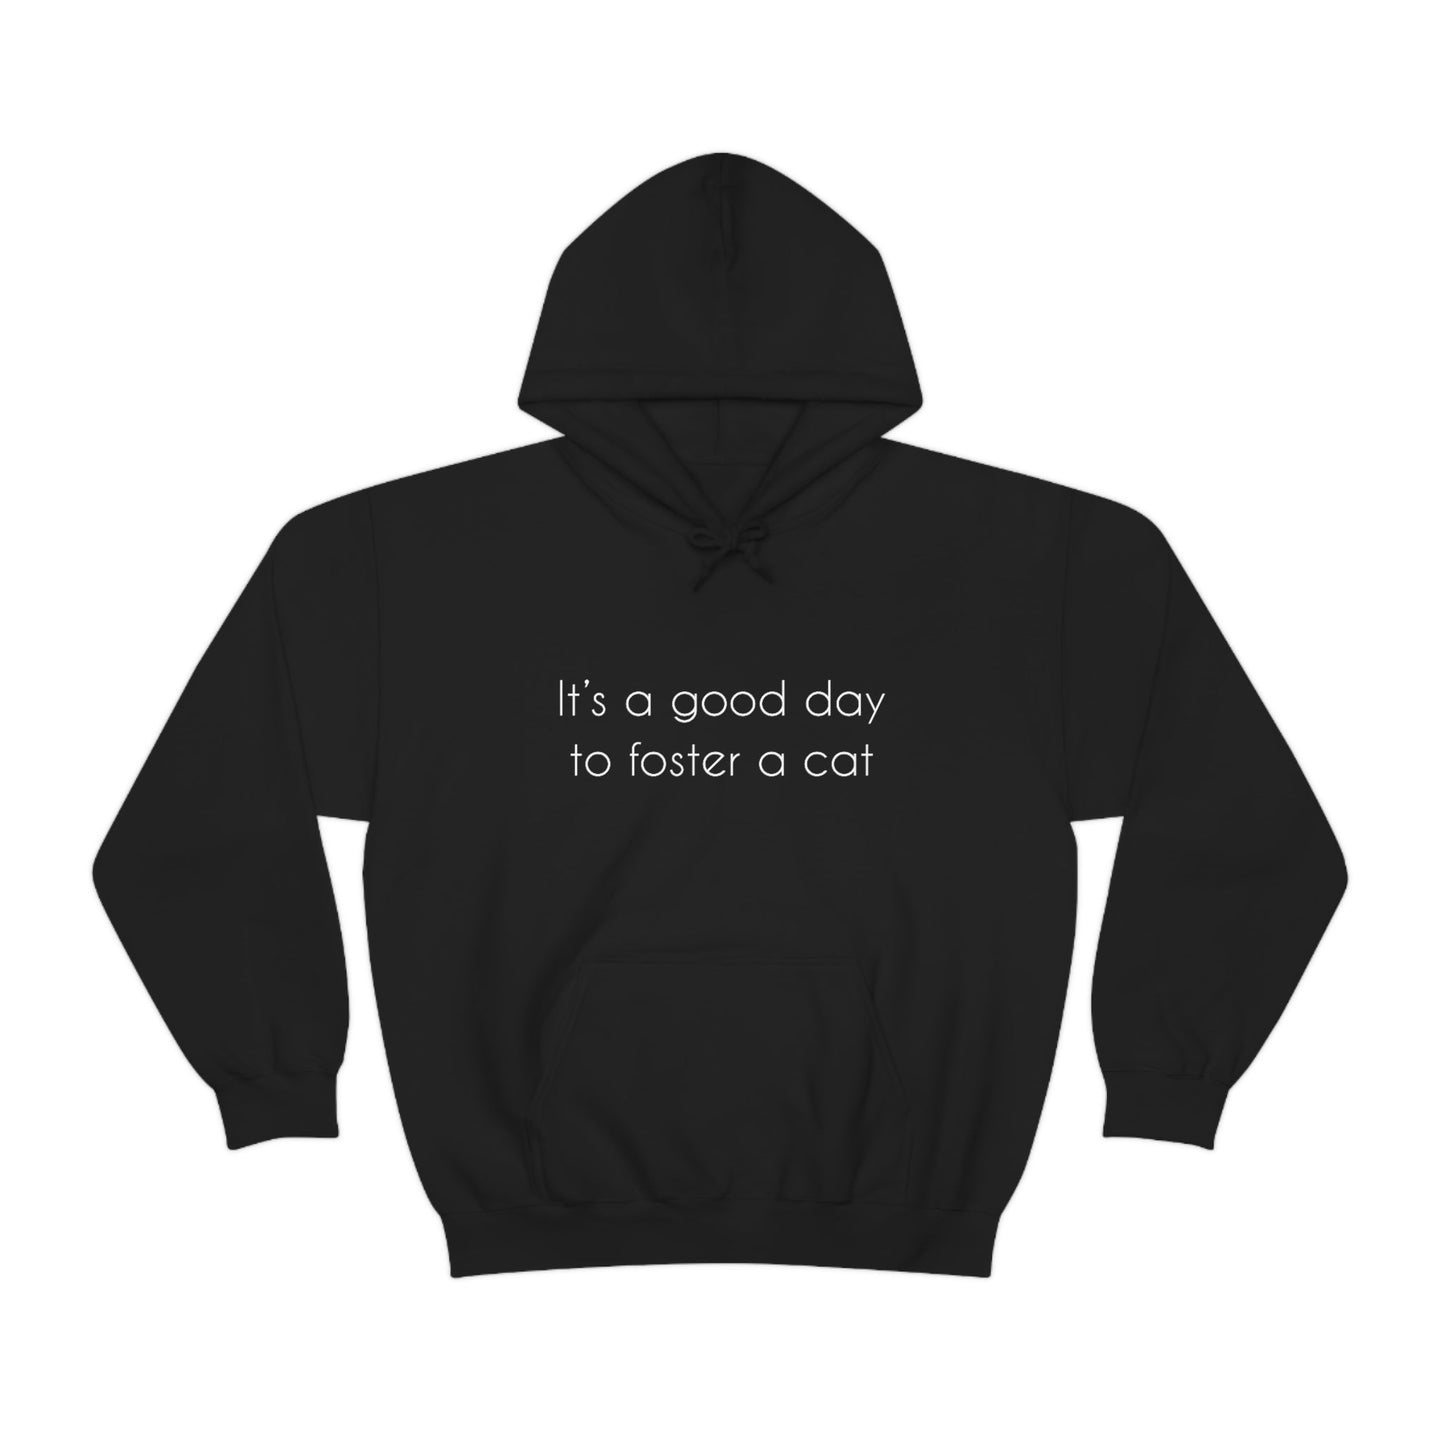 It's A Good Day To Foster A Cat | Hooded Sweatshirt - Detezi Designs-25285505912934698153